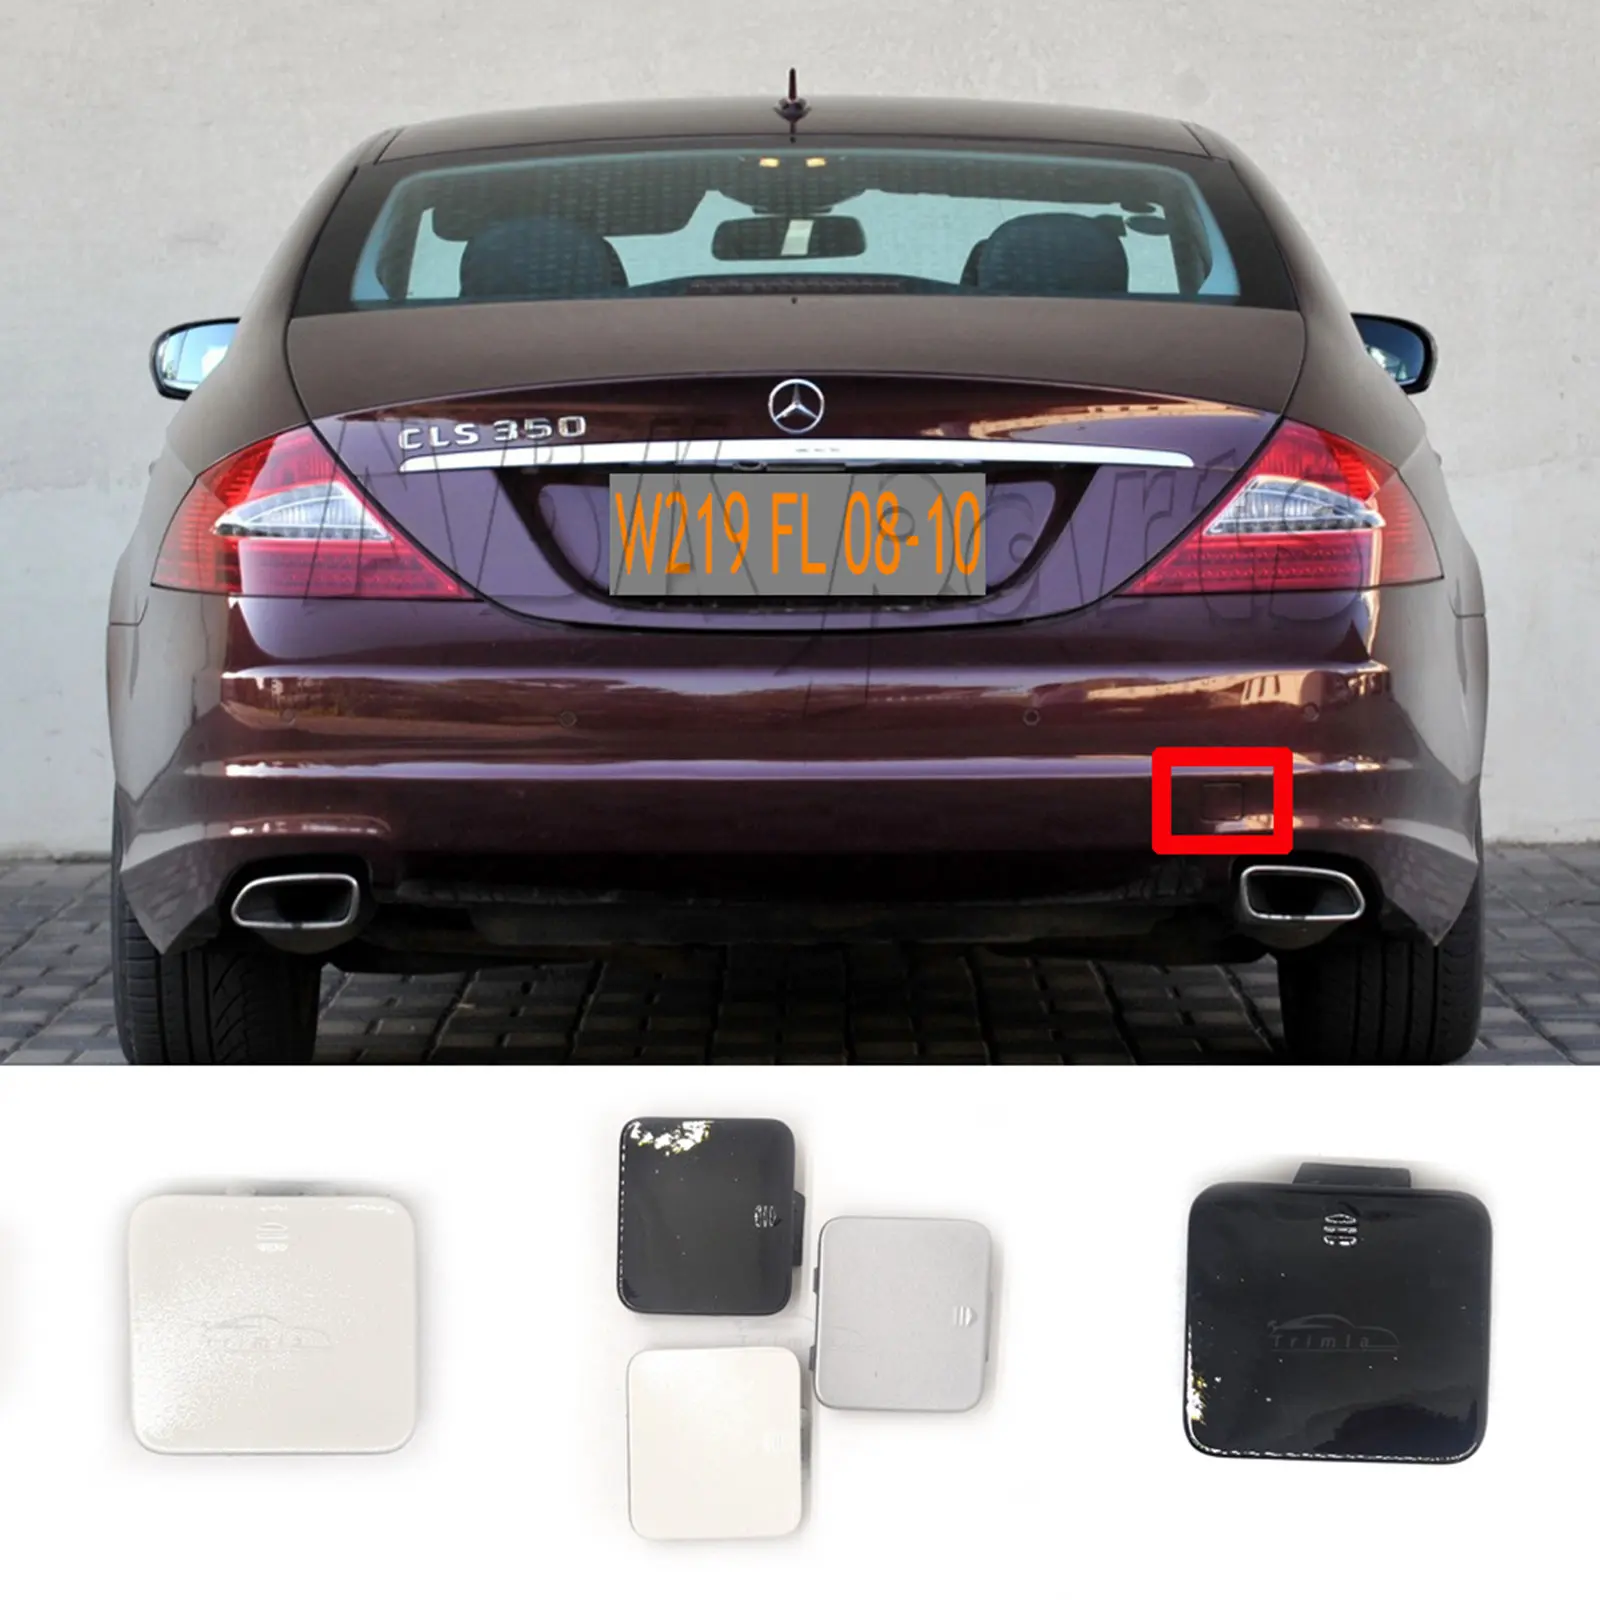 

Fit 08-10 Mercedes CLS W219 Facelift Coupe C219 CLS280 CLS300 CLS320 CLS350 CLS550 REAR HOOK EYE TOW COVER 2198800705